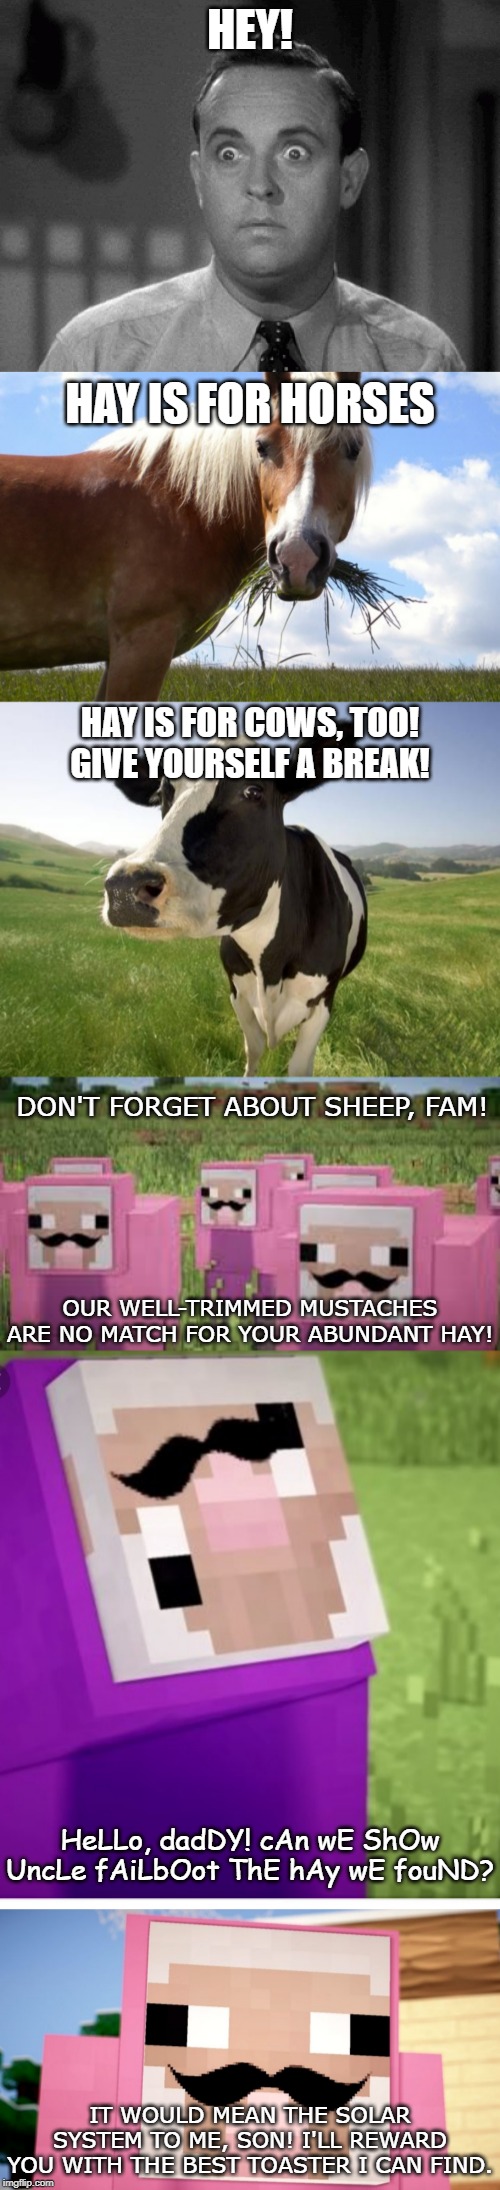 Hay is for ah forget it i'm outta here | HEY! HAY IS FOR HORSES; HAY IS FOR COWS, TOO! GIVE YOURSELF A BREAK! DON'T FORGET ABOUT SHEEP, FAM! OUR WELL-TRIMMED MUSTACHES ARE NO MATCH FOR YOUR ABUNDANT HAY! HeLLo, dadDY! cAn wE ShOw UncLe fAiLbOot ThE hAy wE fouND? IT WOULD MEAN THE SOLAR SYSTEM TO ME, SON! I'LL REWARD YOU WITH THE BEST TOASTER I CAN FIND. | image tagged in shocked face,horse eating,cow,pink sheep,purple shep,puns | made w/ Imgflip meme maker